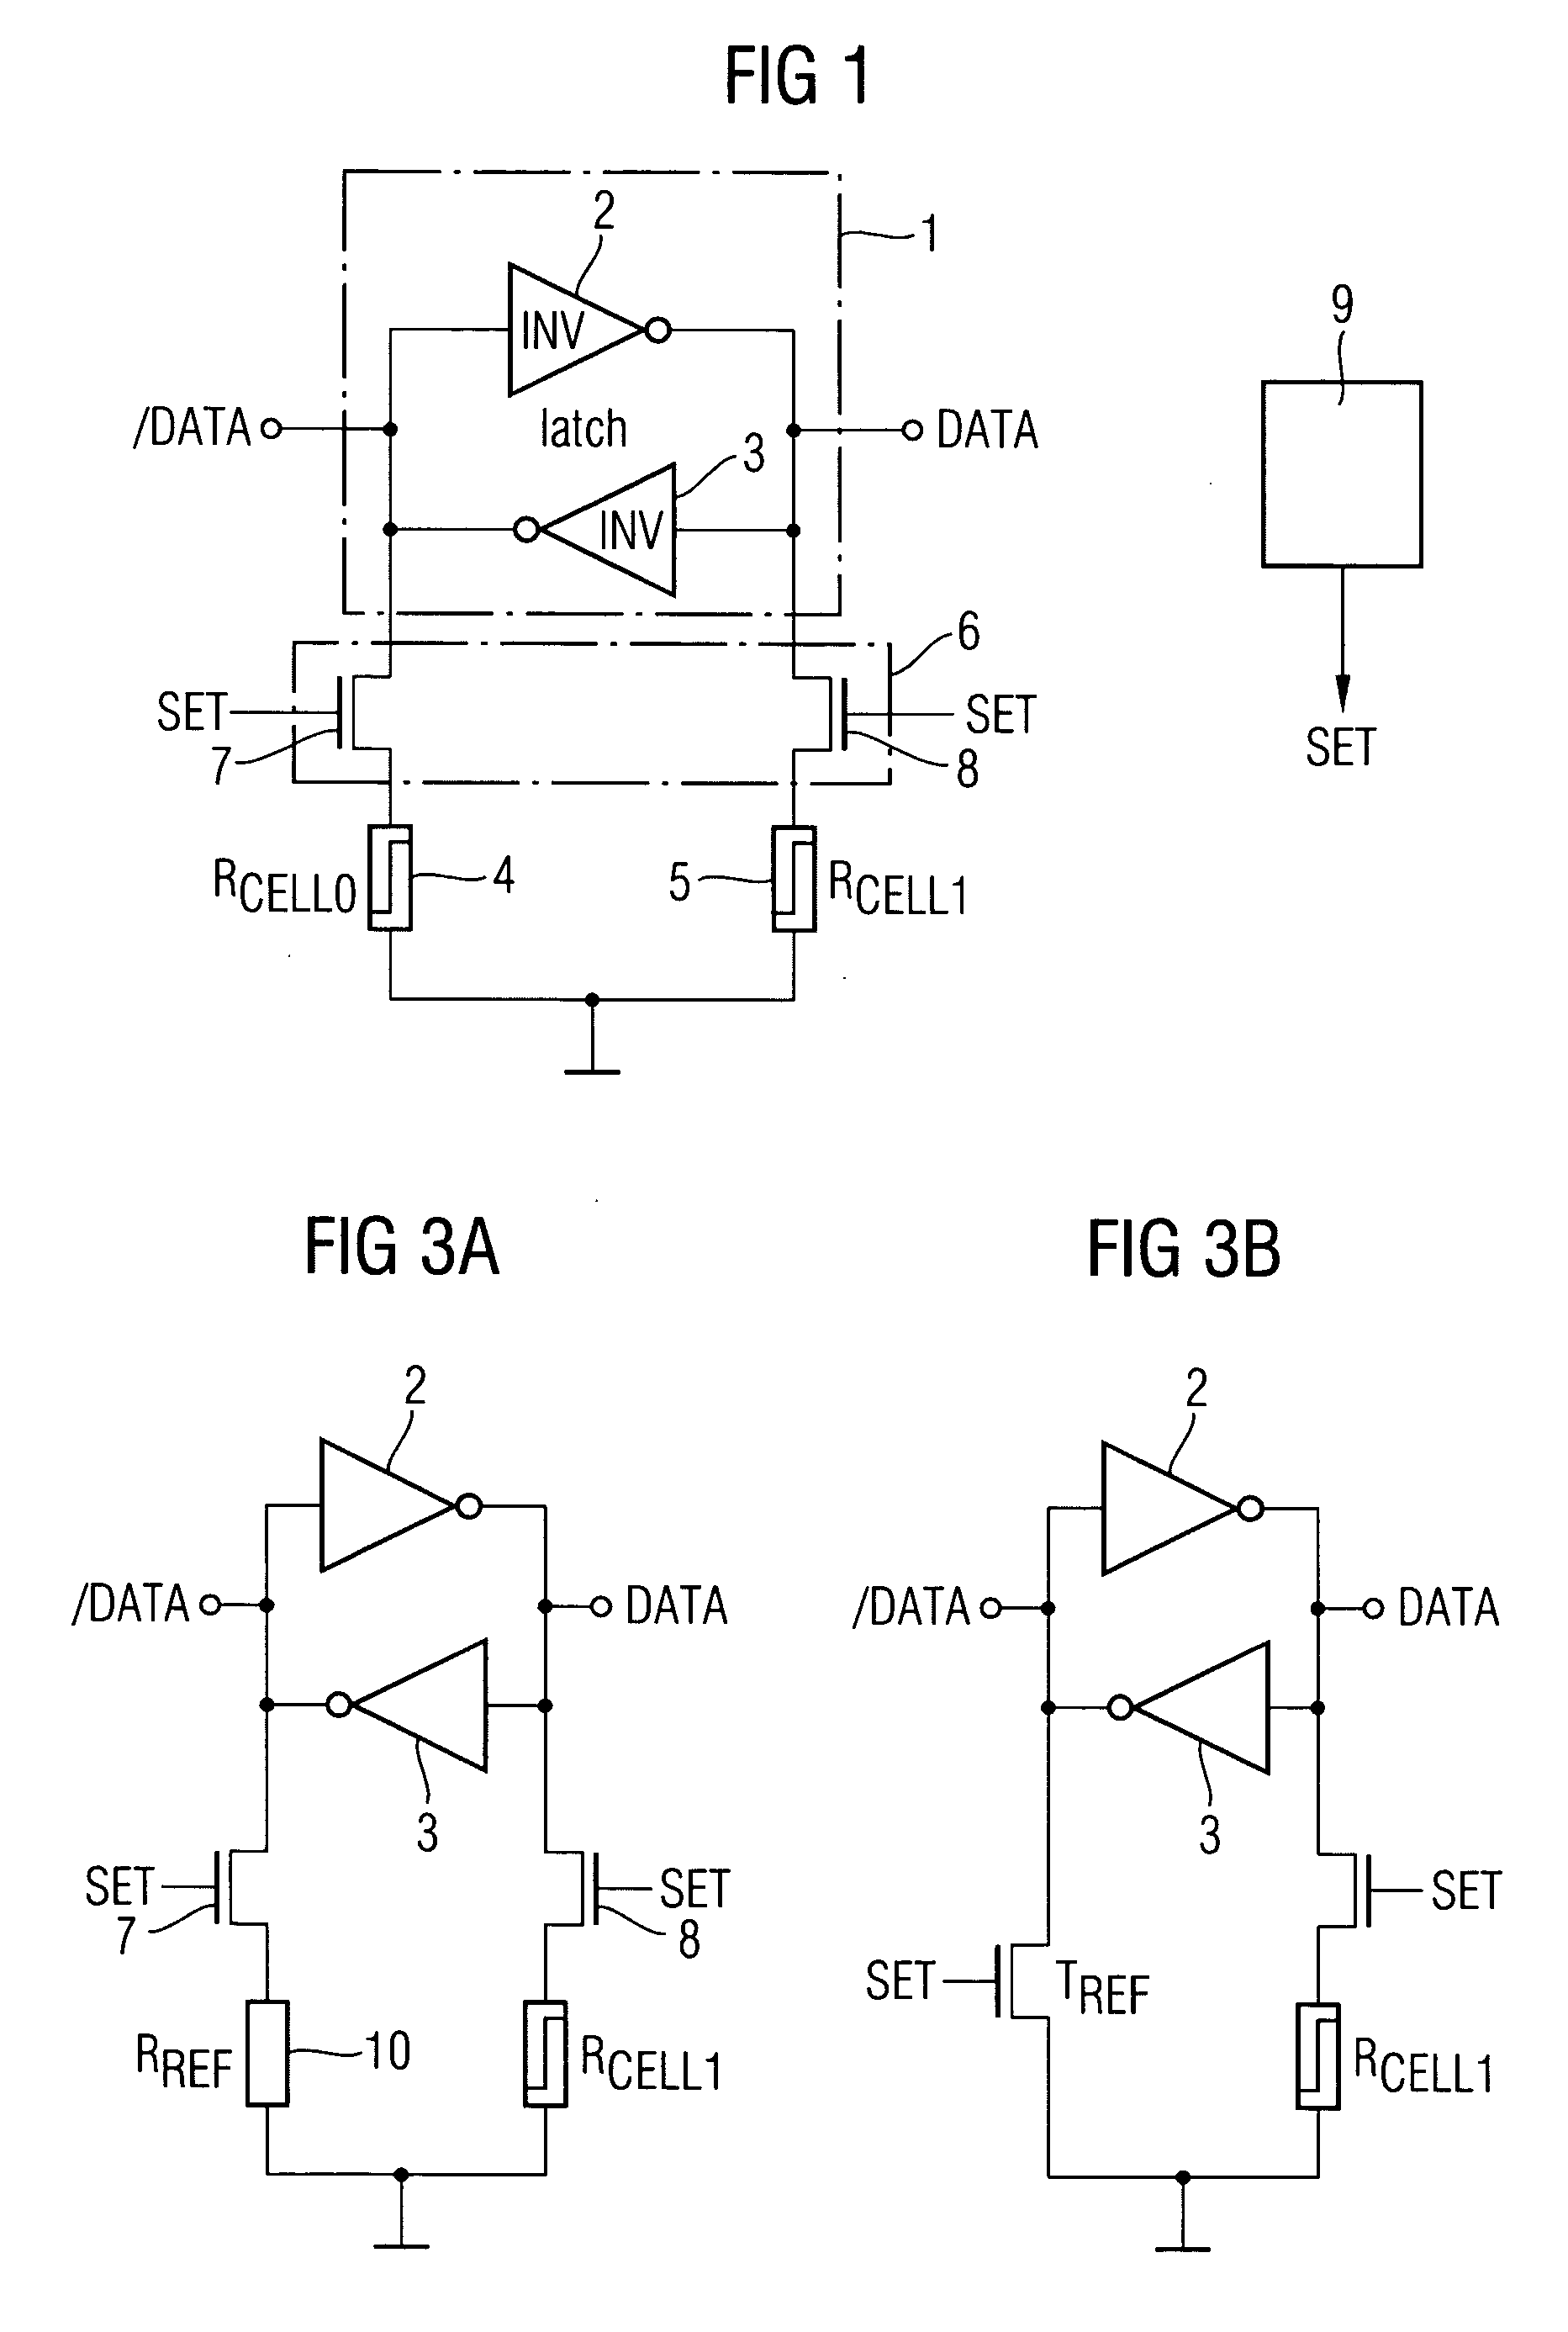 Non-volatile memory cell for storage of a data item in an integrated circuit